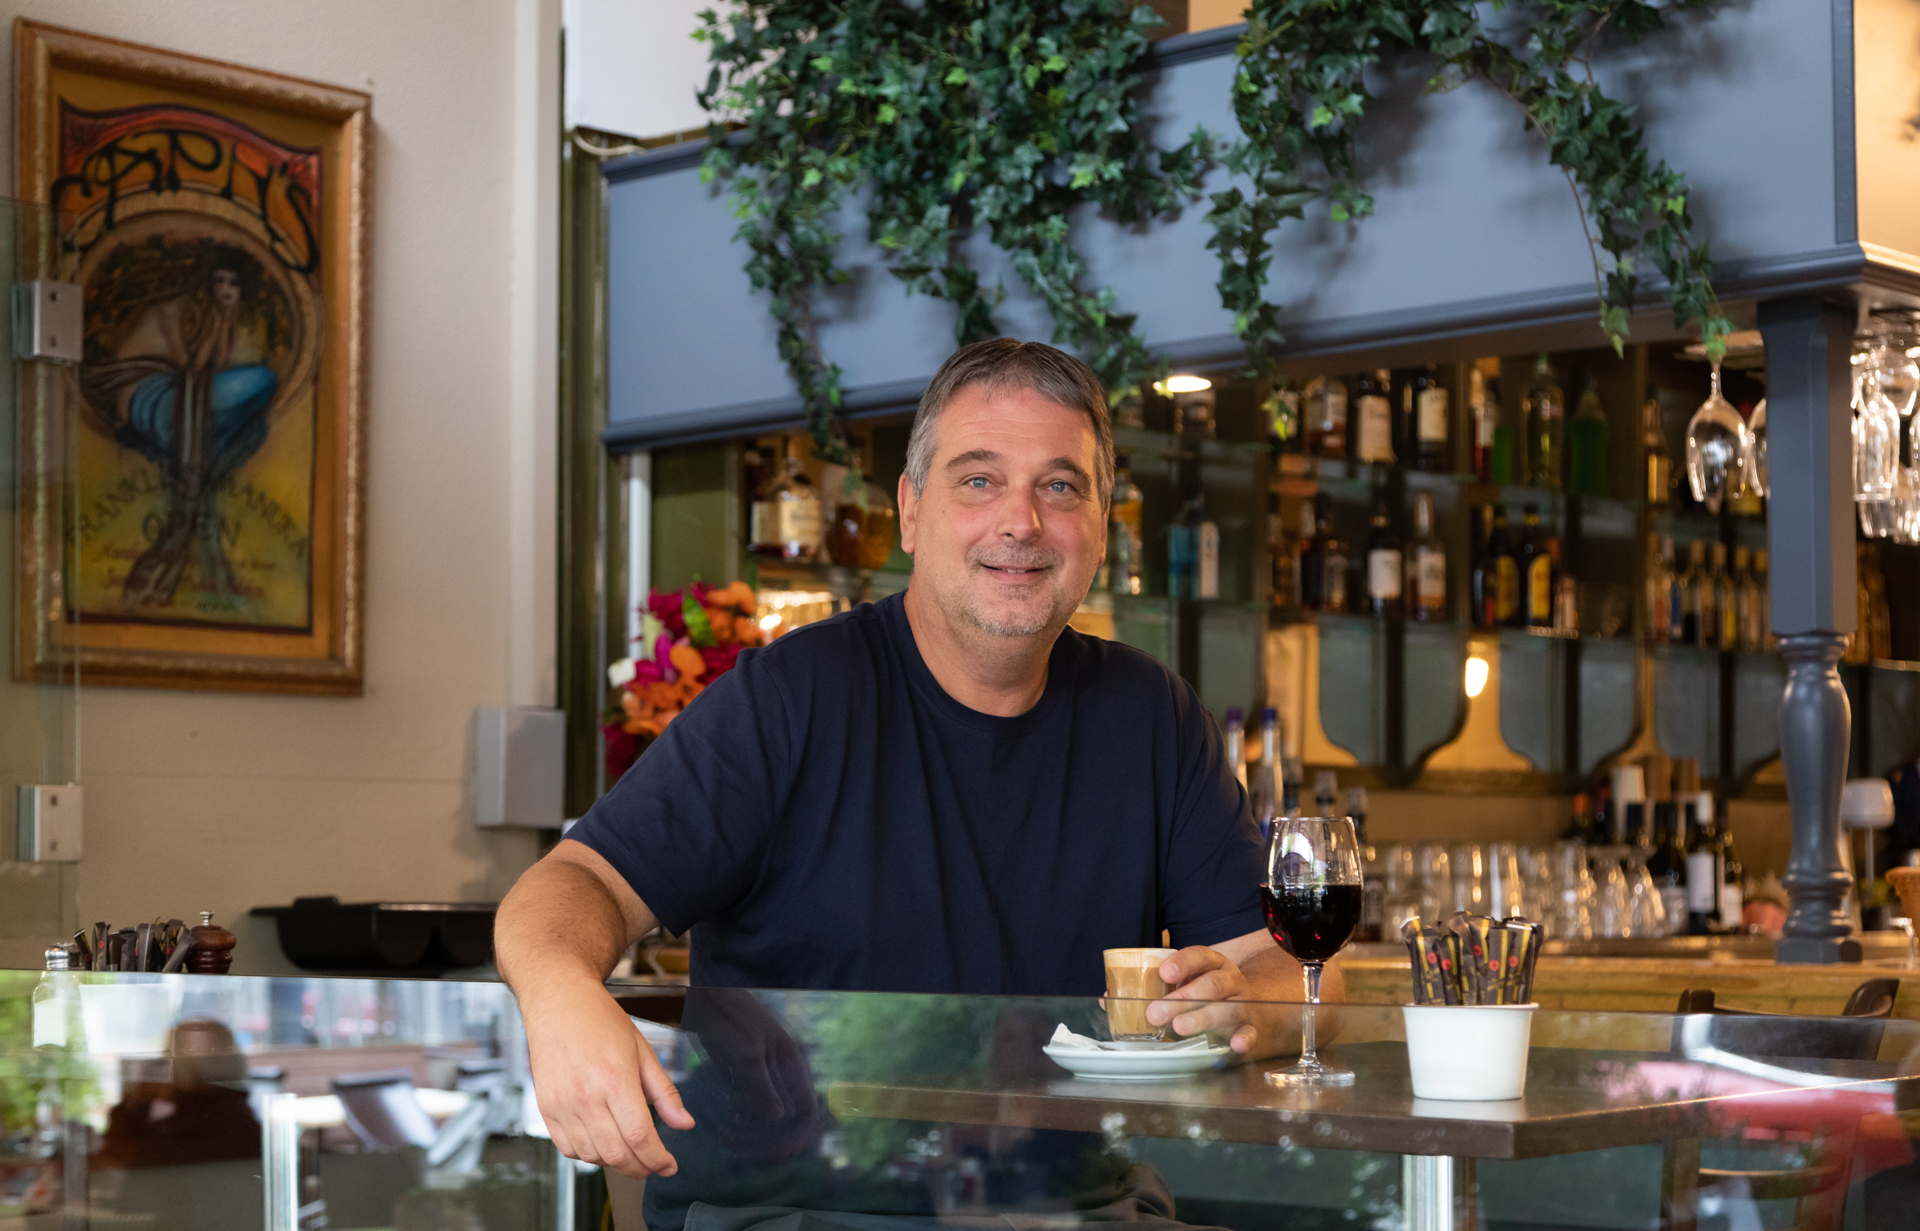 Five minutes with Manny Notaras, CAPHS Cafe Bar and Restaurant